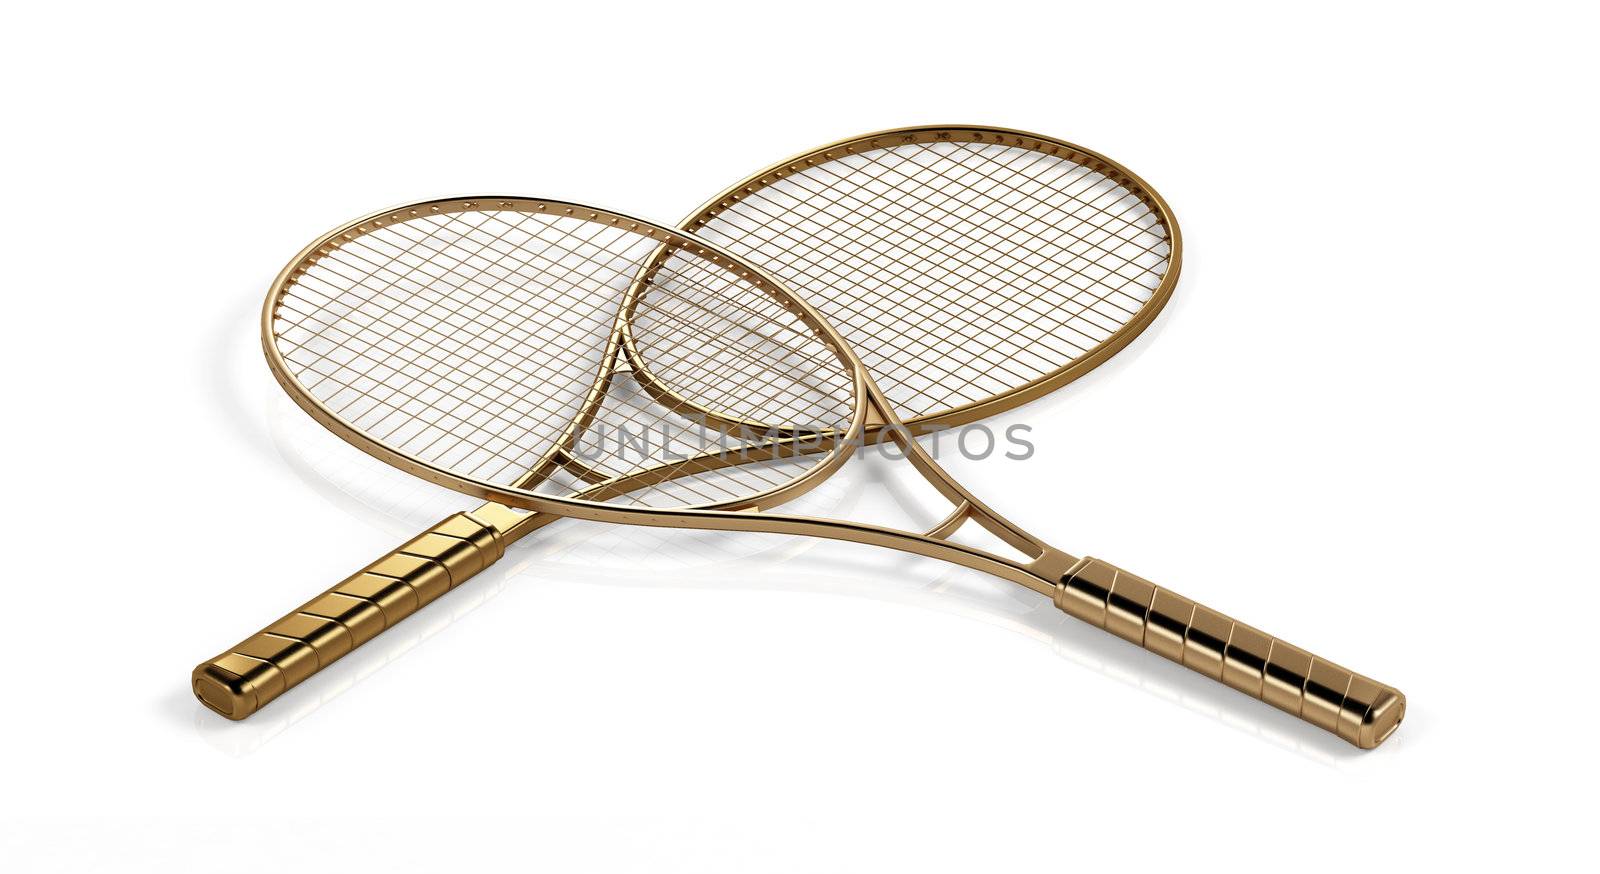 Tennis rackets by Shmer